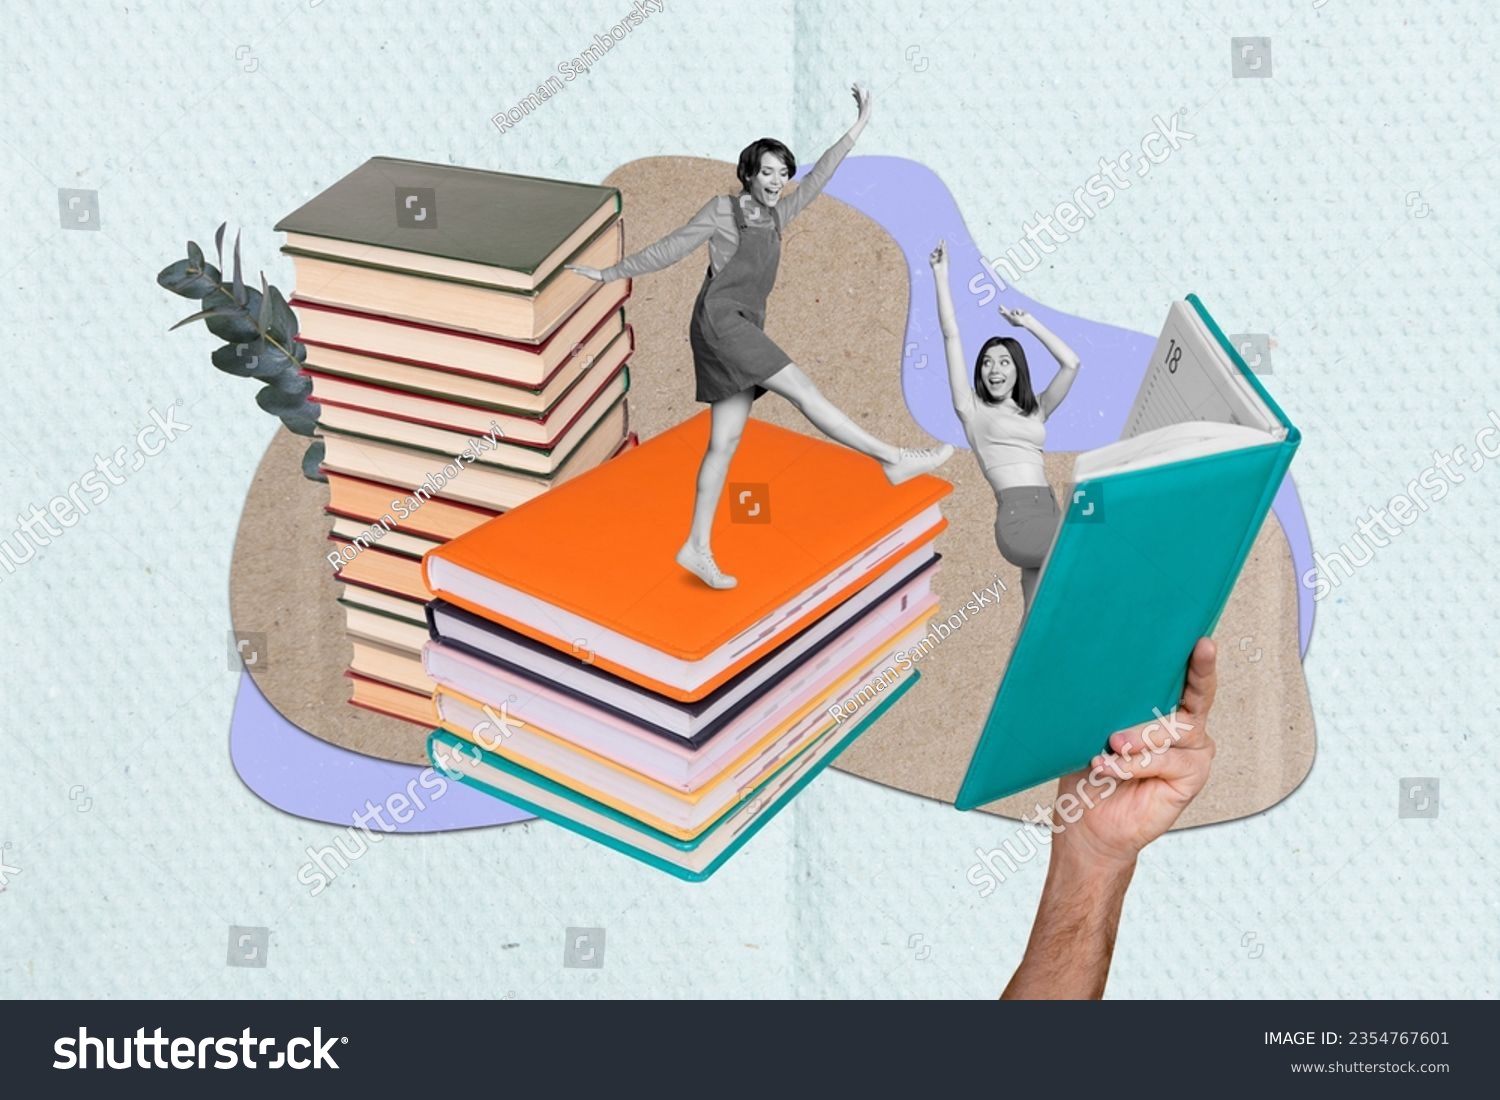 Collage picture of huge hand pile stack book two mini black white colors dancing girls isolated on paper creative background #2354767601